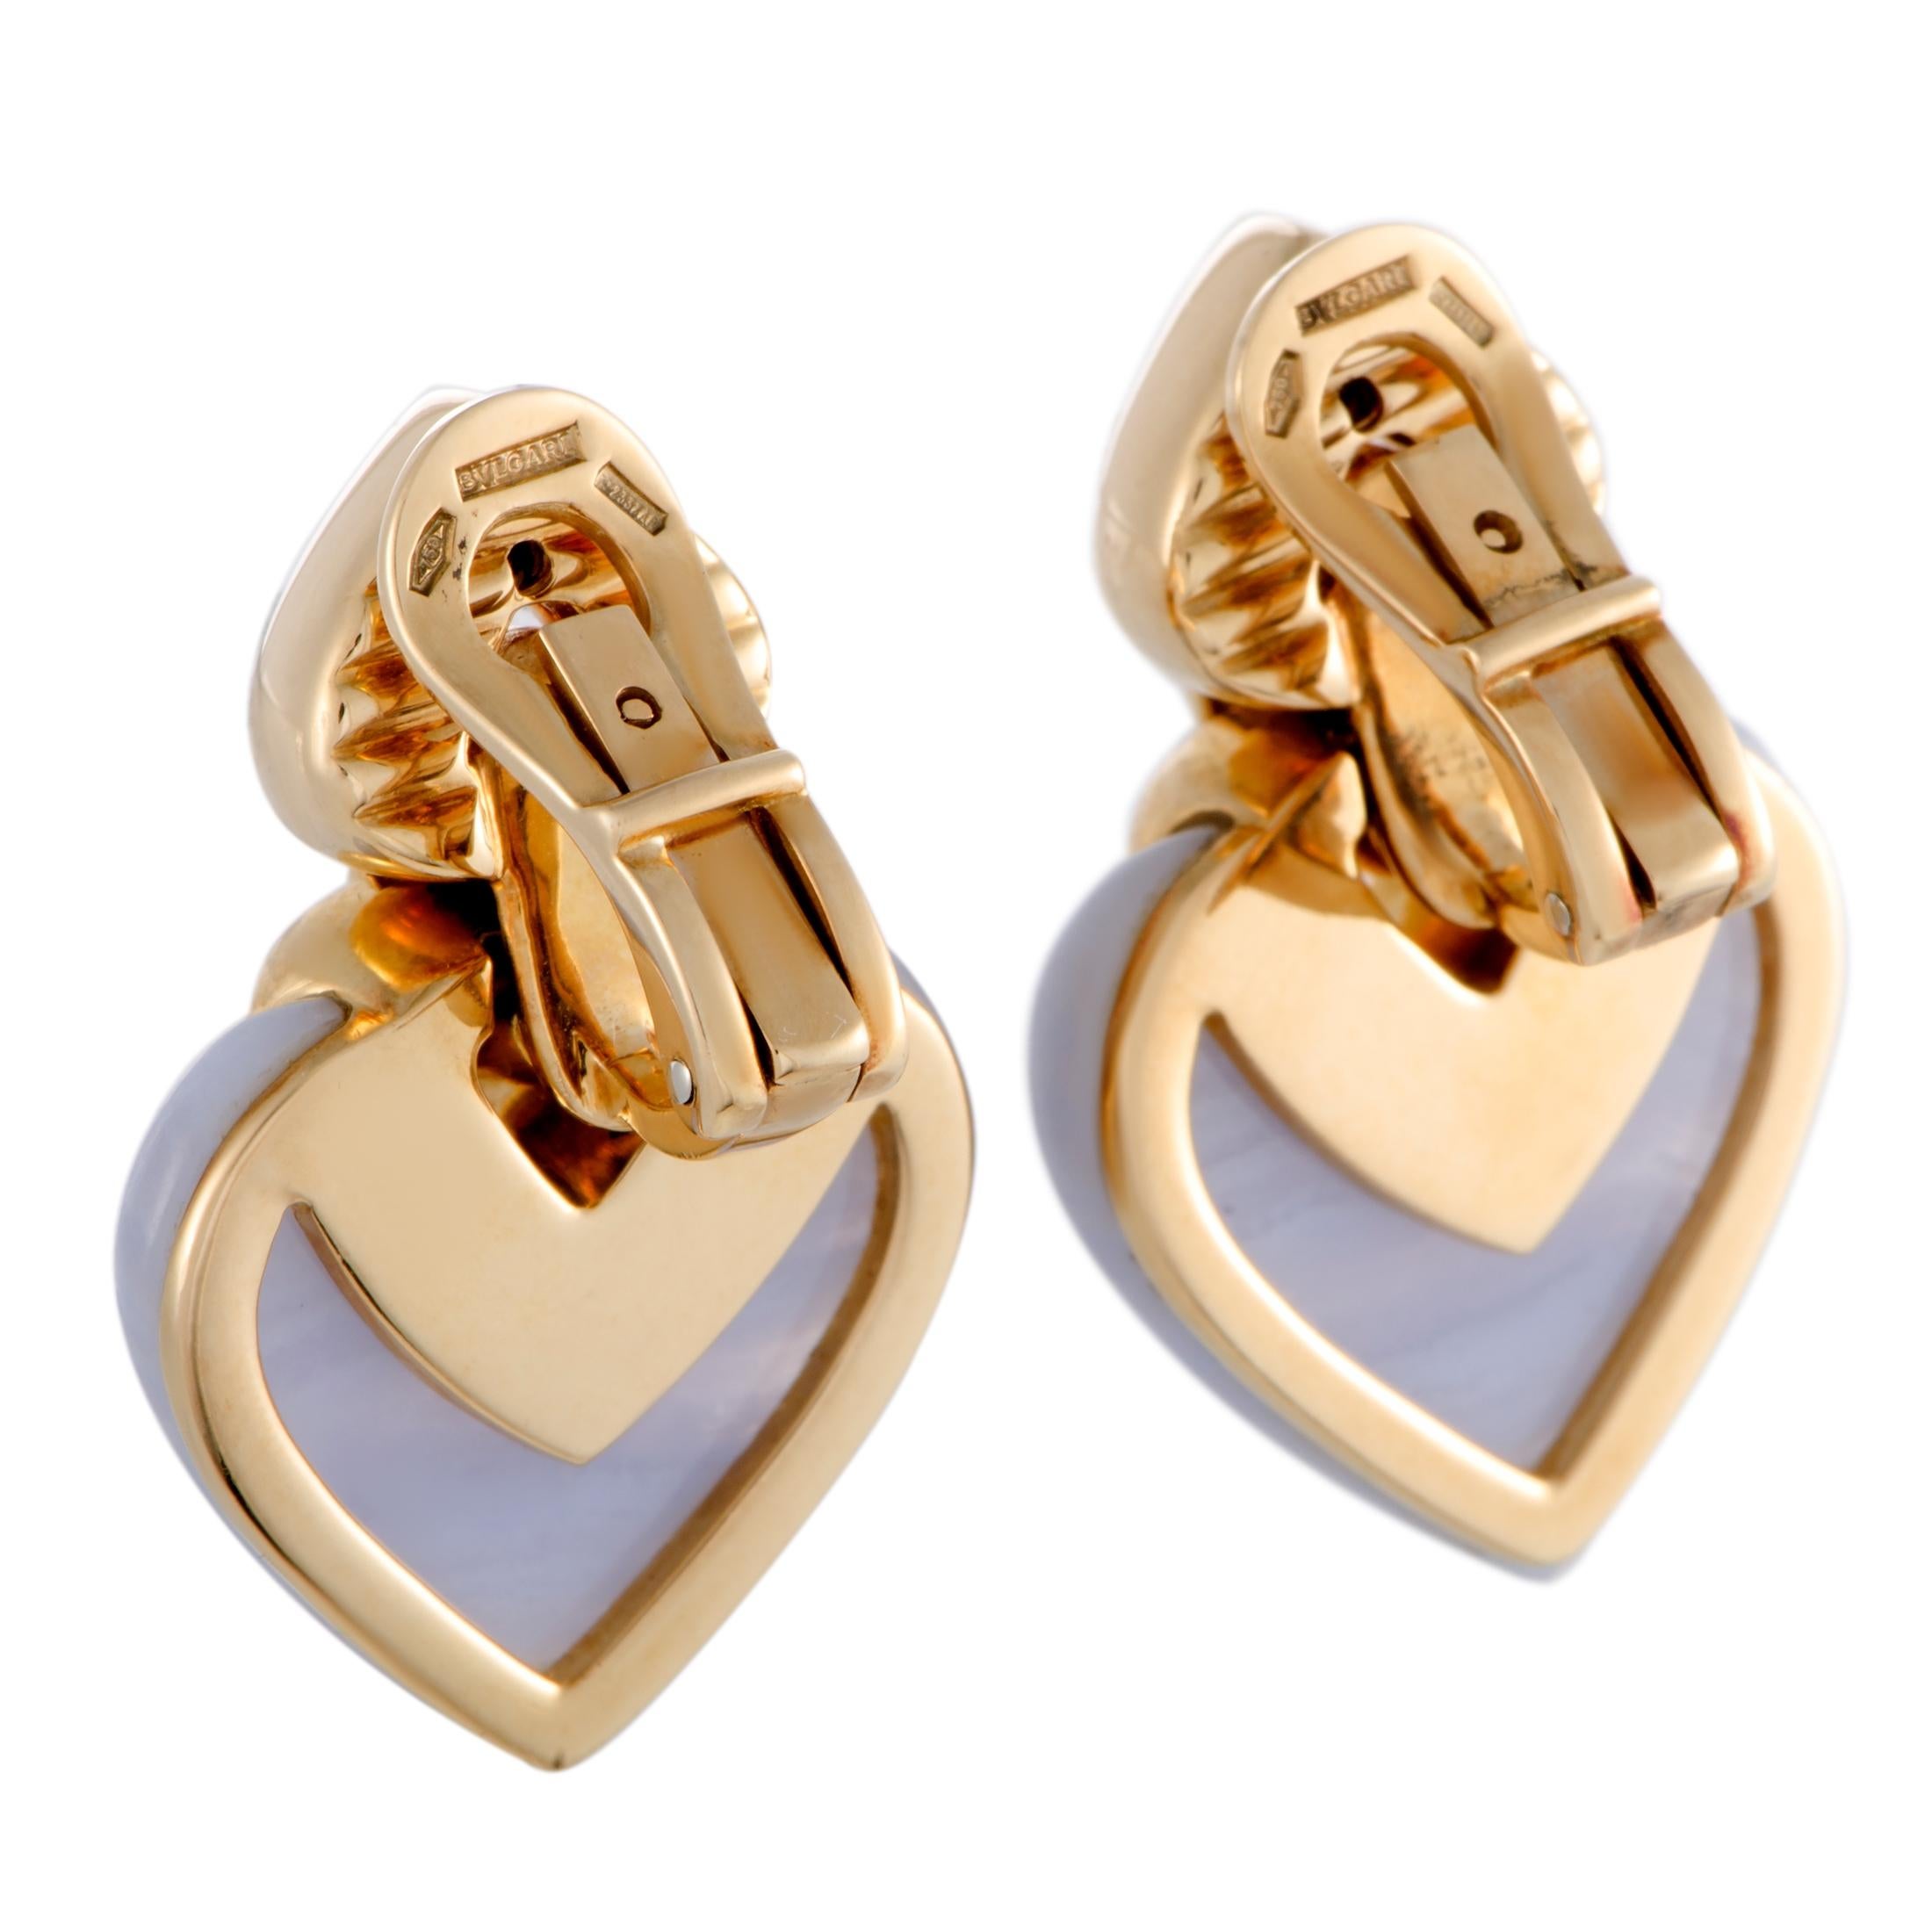 Embellish your ensembles in a splendidly feminine fashion with these beautiful Bvlgari earrings that boast lovely design and exquisite craftsmanship quality. The earrings are made of 18K yellow gold and the pair is decorated with sublime chalcedony